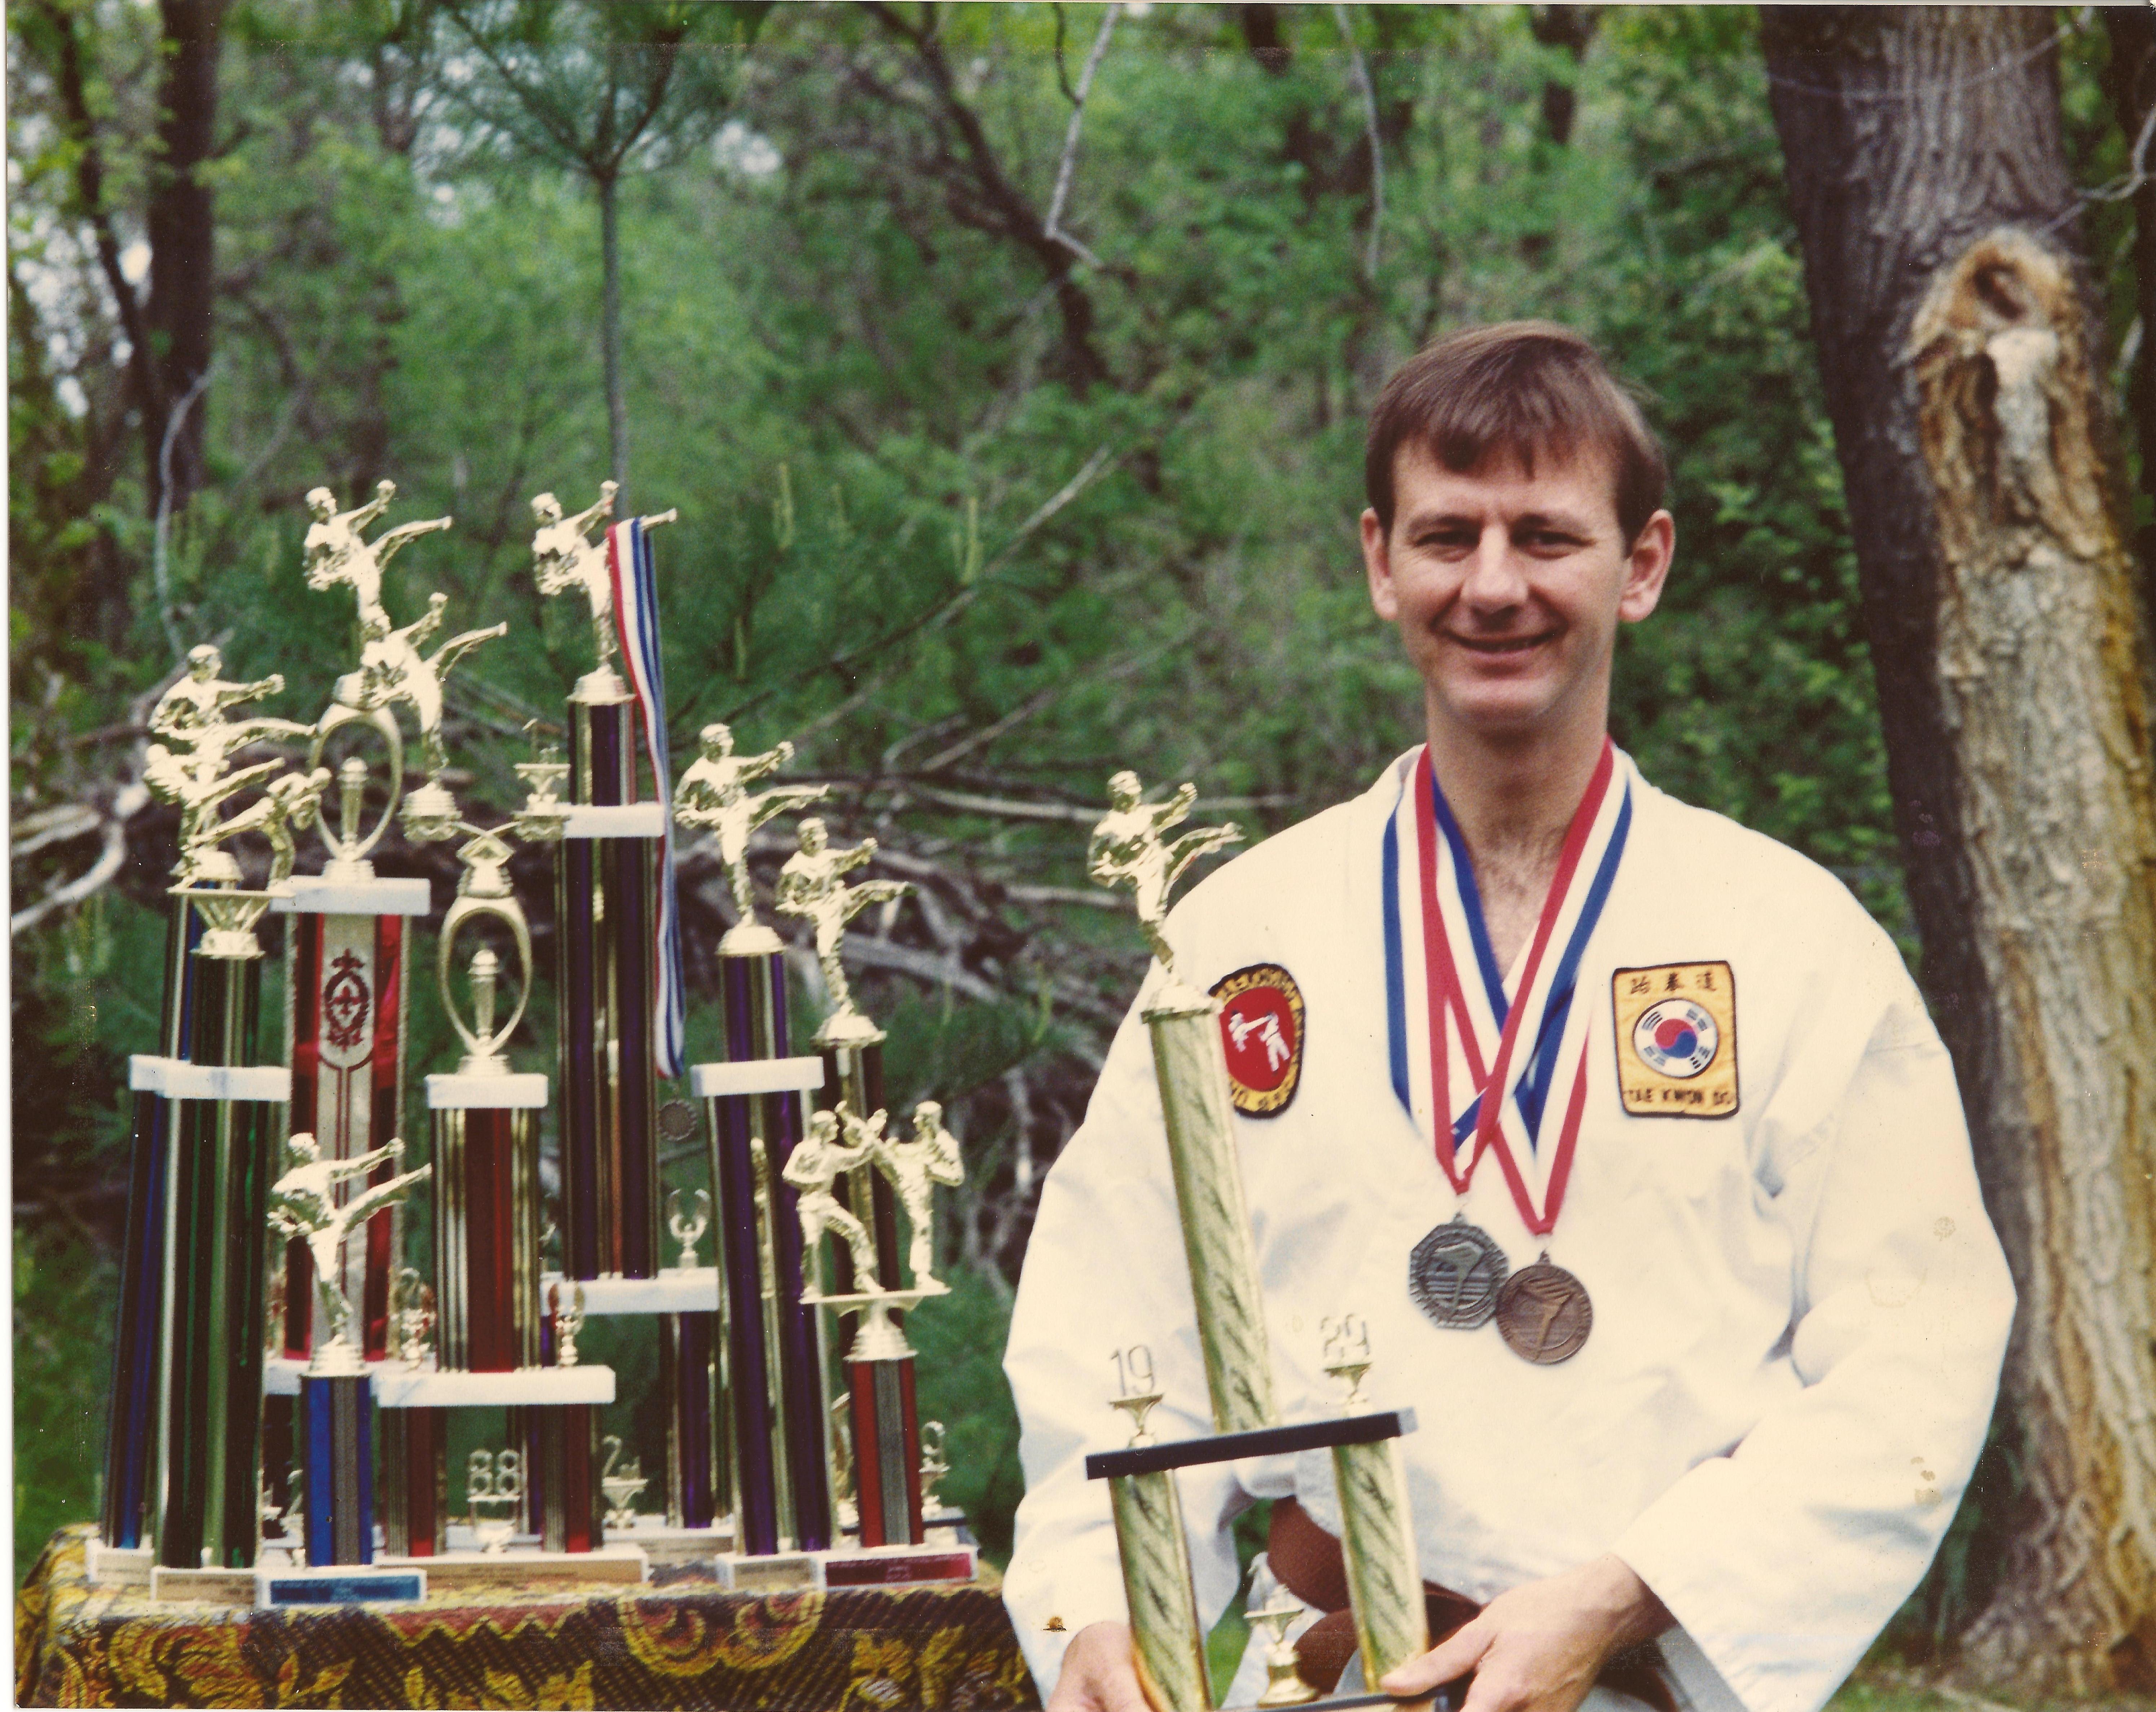 Gus Rhodes with the ten trophies which he won during the two years that he competed in Martial Arts Tournments. In the 1988 State Athletic Games he won the bronze medal for sparring and won the silver medal at the State Games the following year. He won the